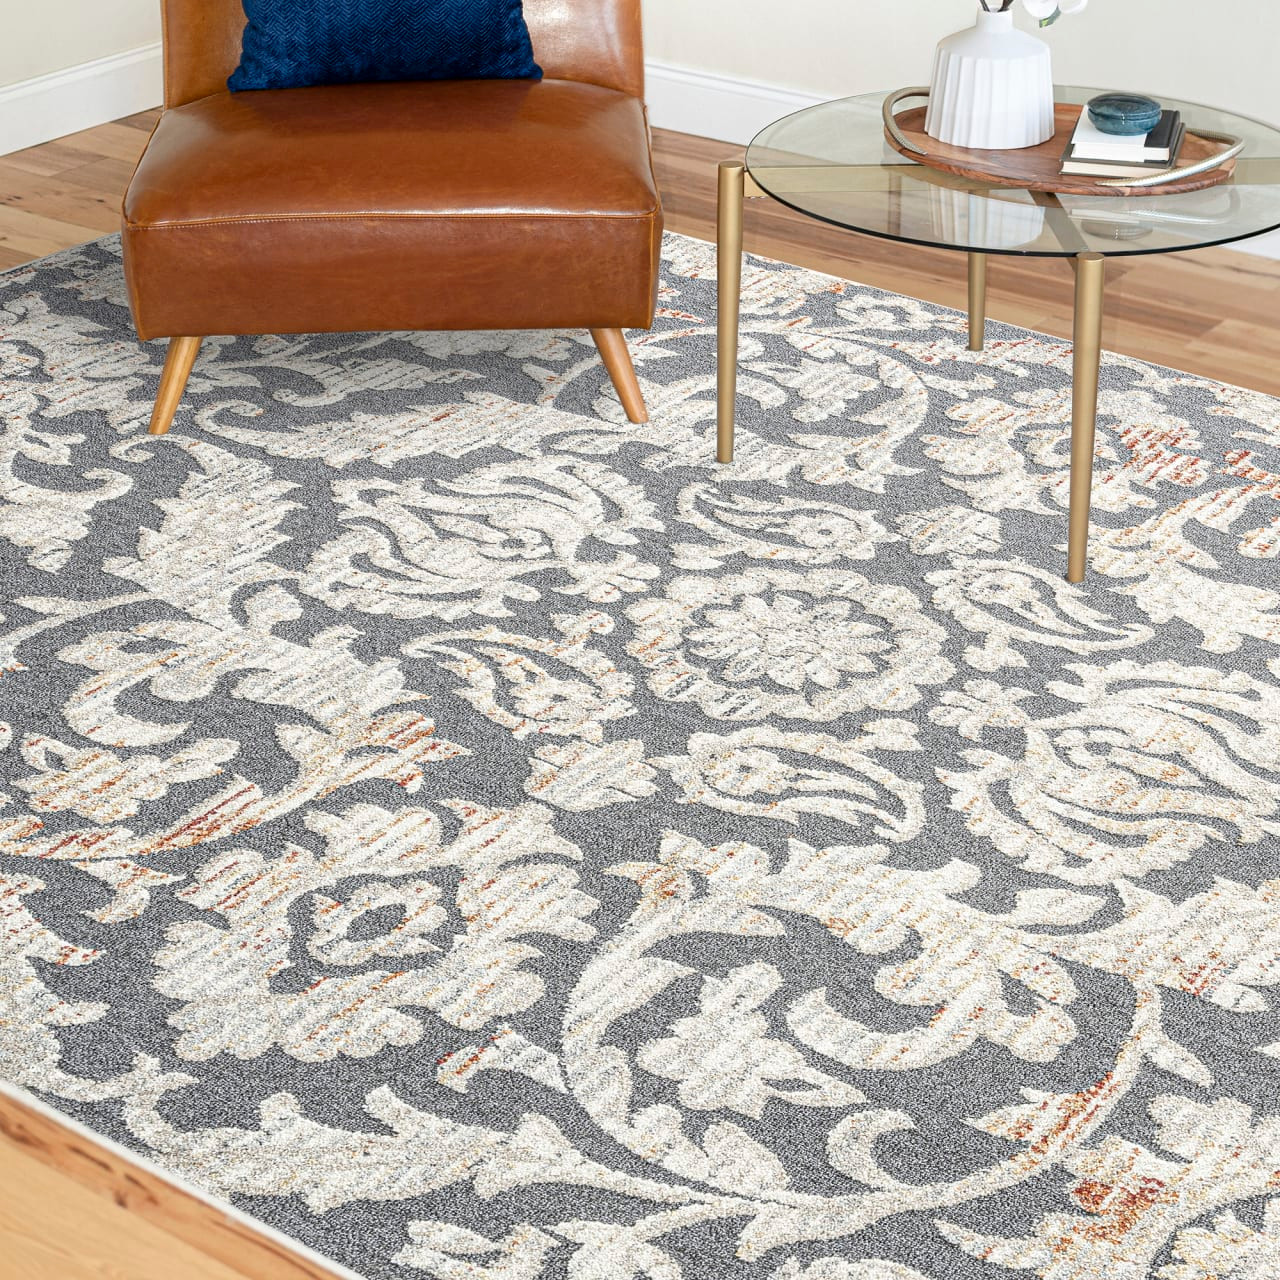 Where and How to Use Oval Rugs in Your Living Room - Decorsify